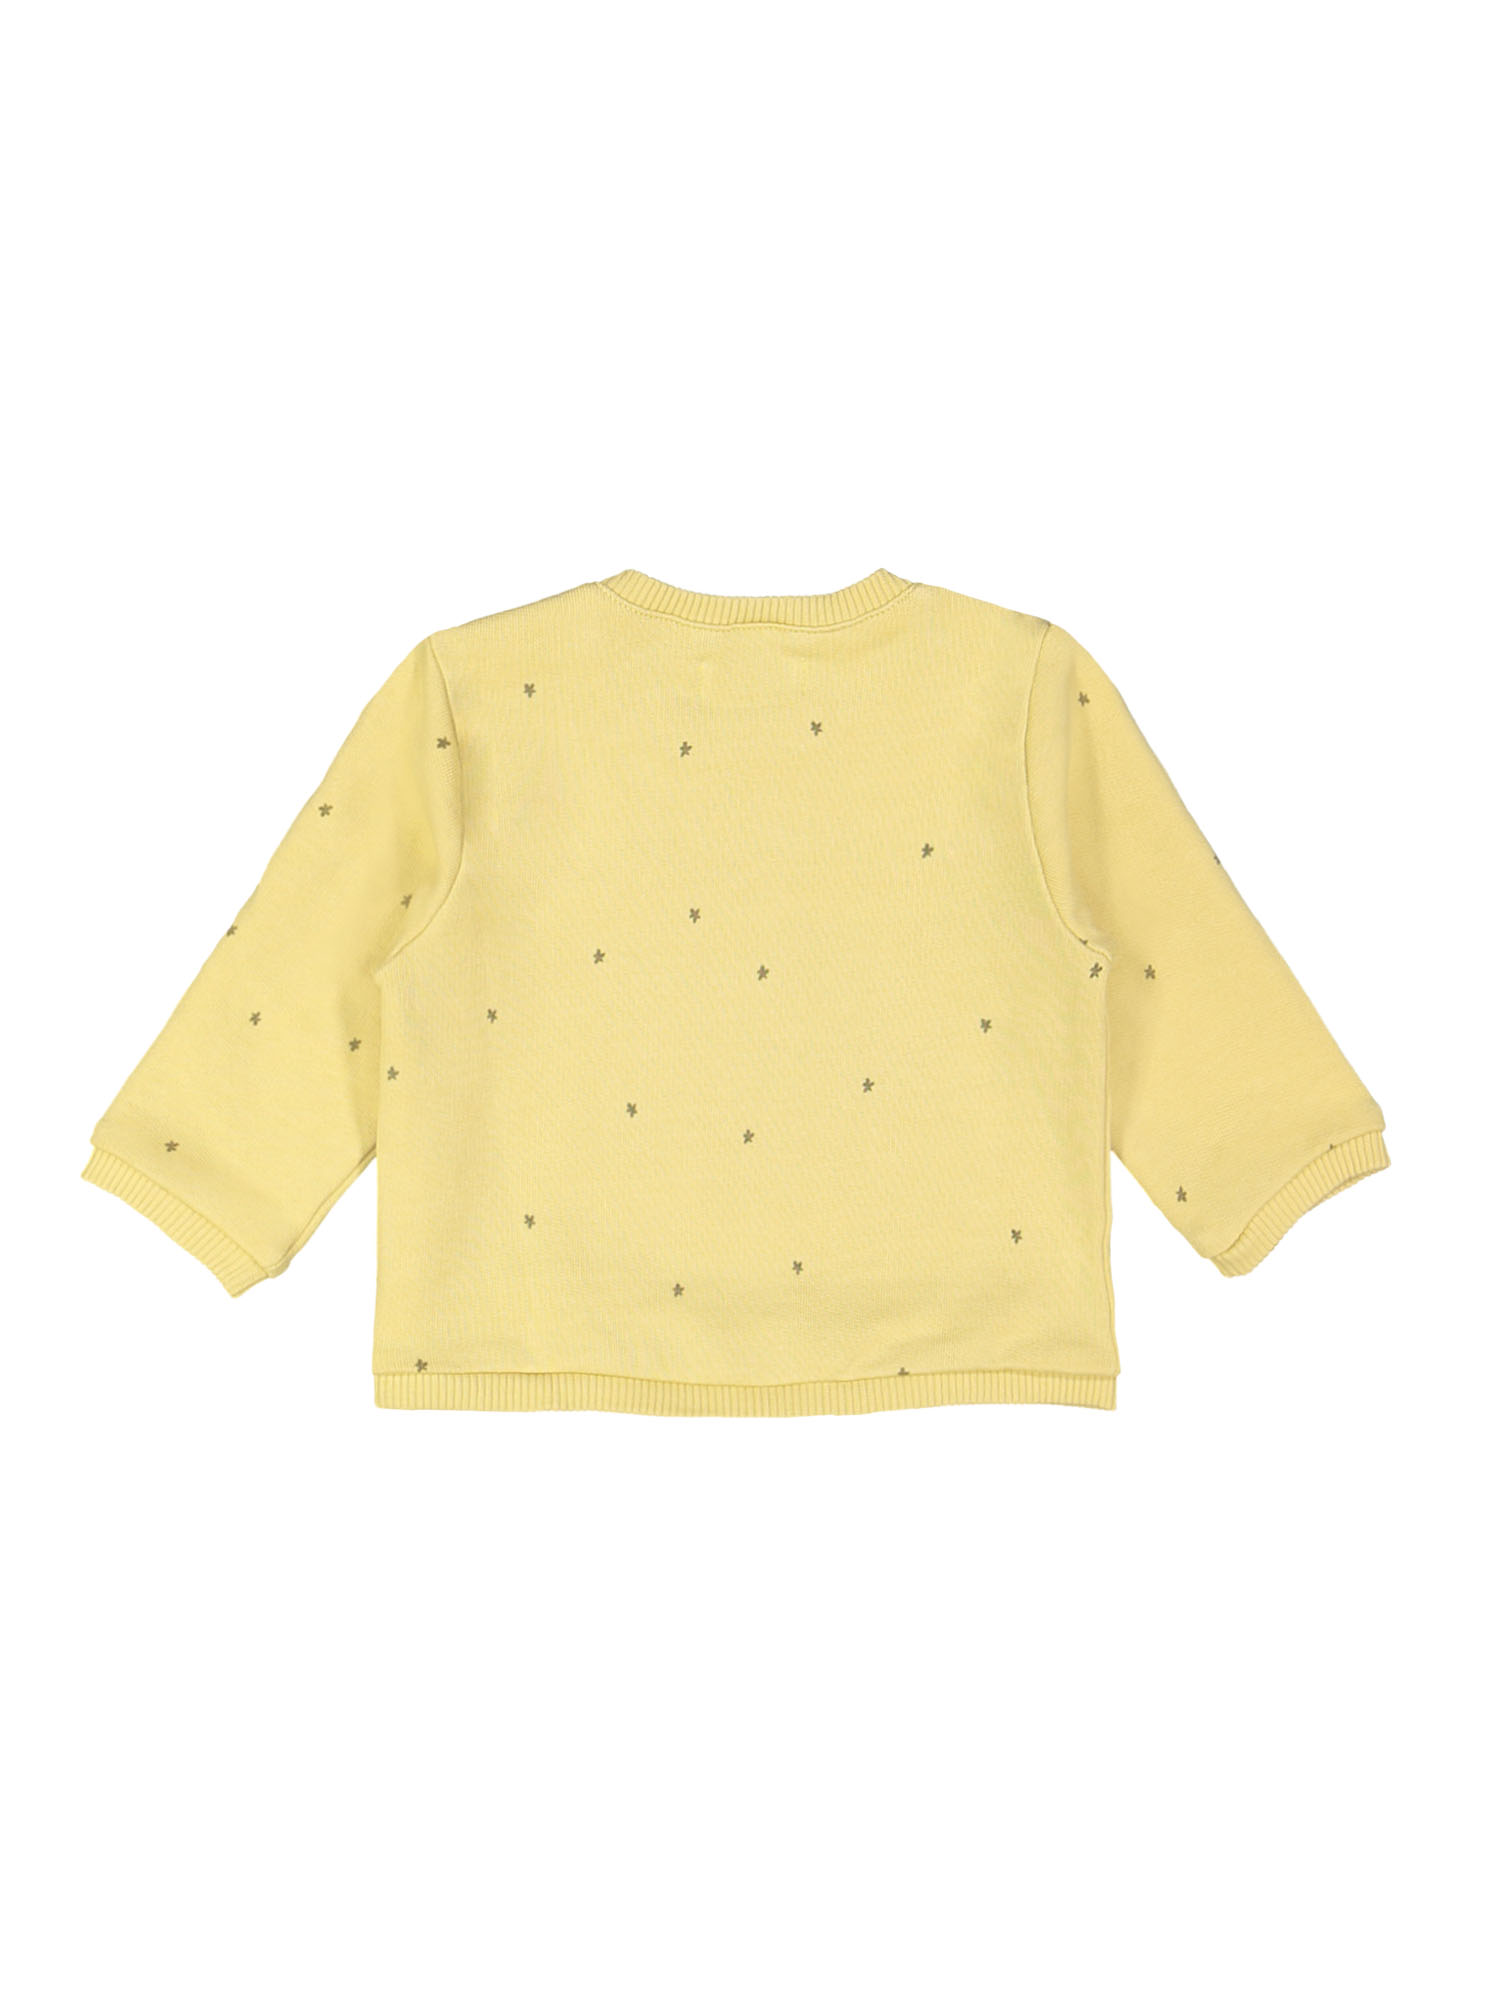 sweater baby club gold mosterd 09m